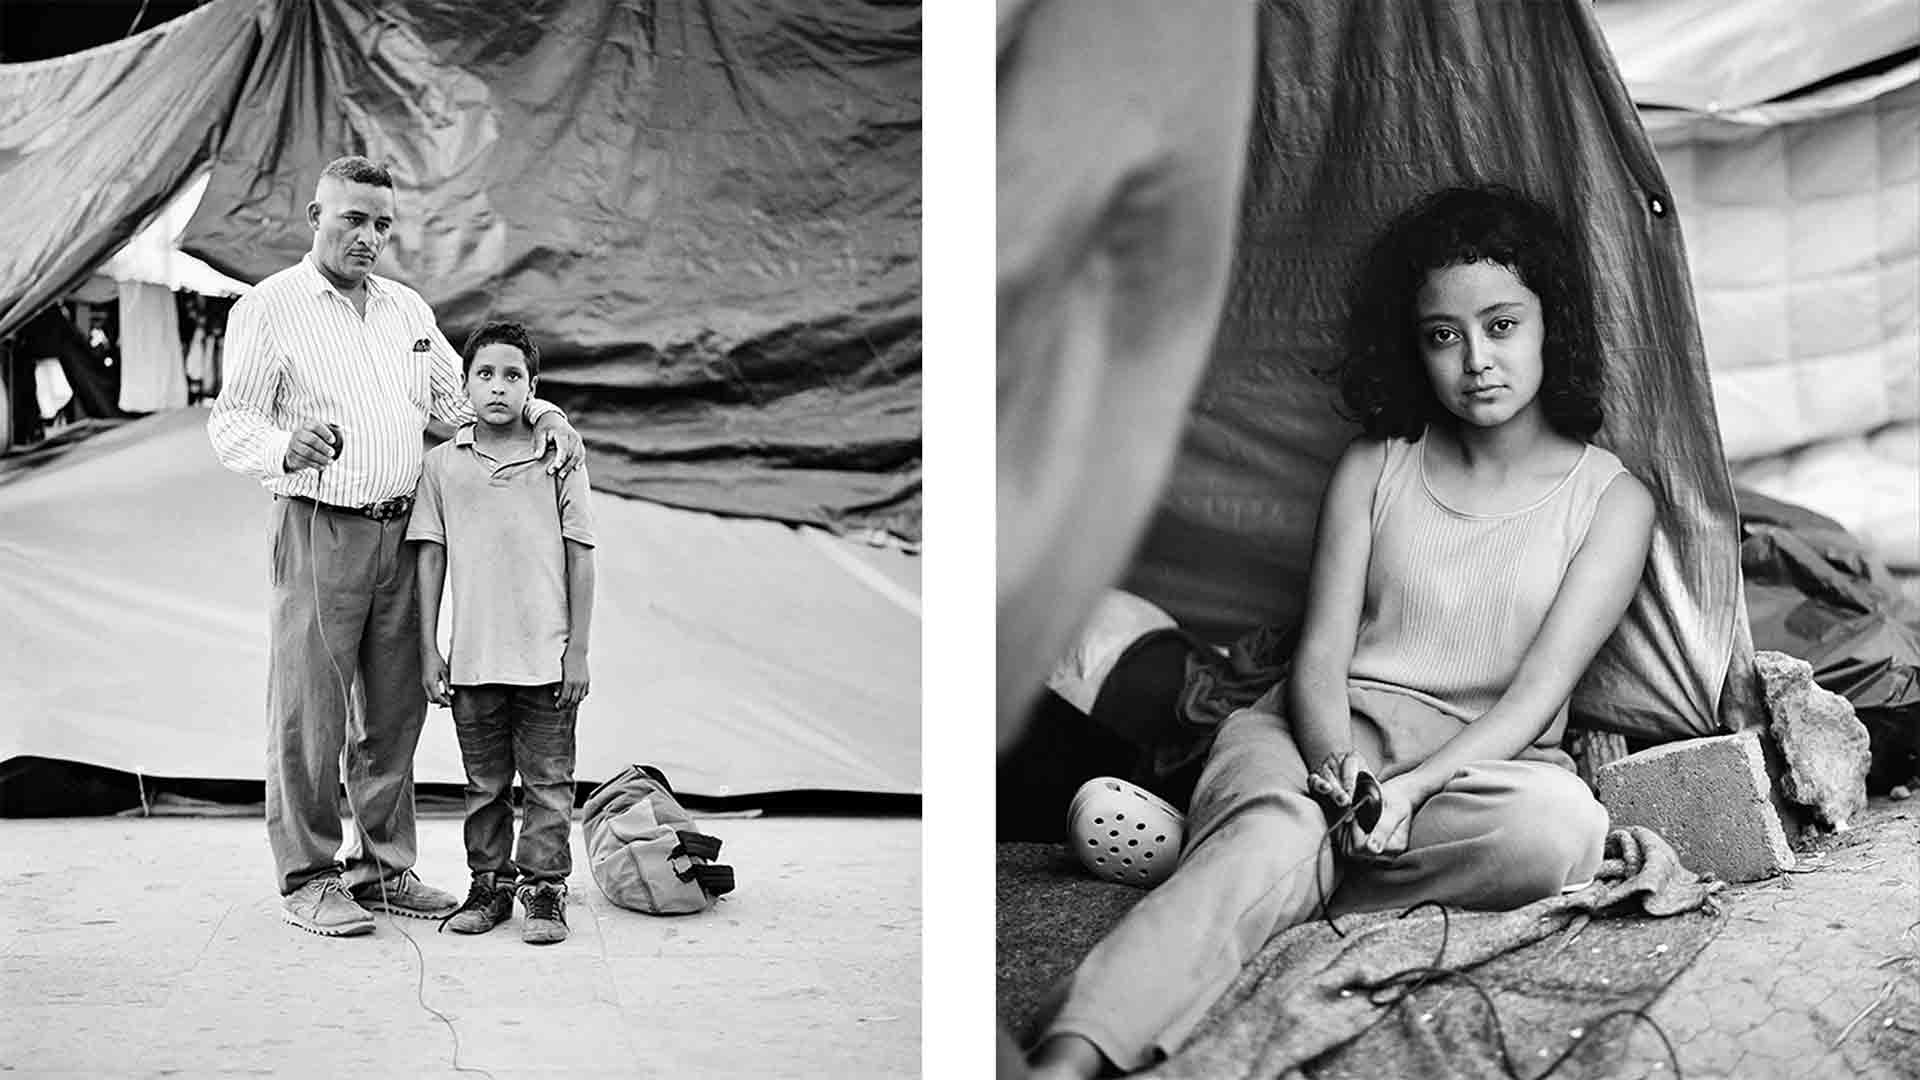 Left: Edwardo Benavides and his son Jonathon Benavides Reyes are migrants from La Unión, El Salvador. They took this portrait at an informal migrant camp in the border city of Reynosa, Mexico. Right: Stephanie Solano, 17, from Zacapa, Guatemala takes a portrait of herself at the camp in Reynosa.